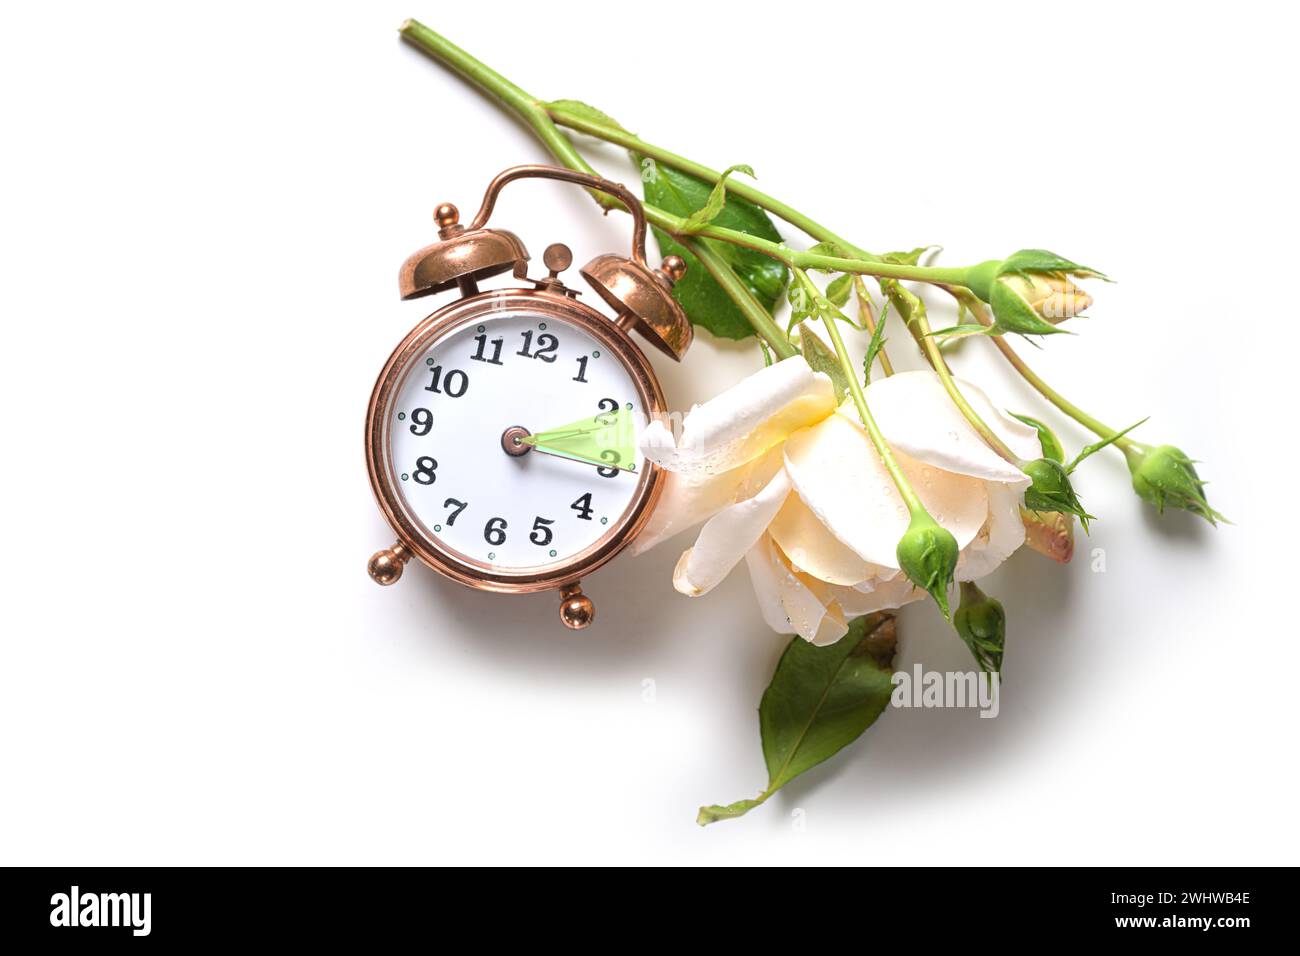 Vintage alarm clock and a light rose showing the hour between daylight saving time in summer and fall back for winter or standar Stock Photo